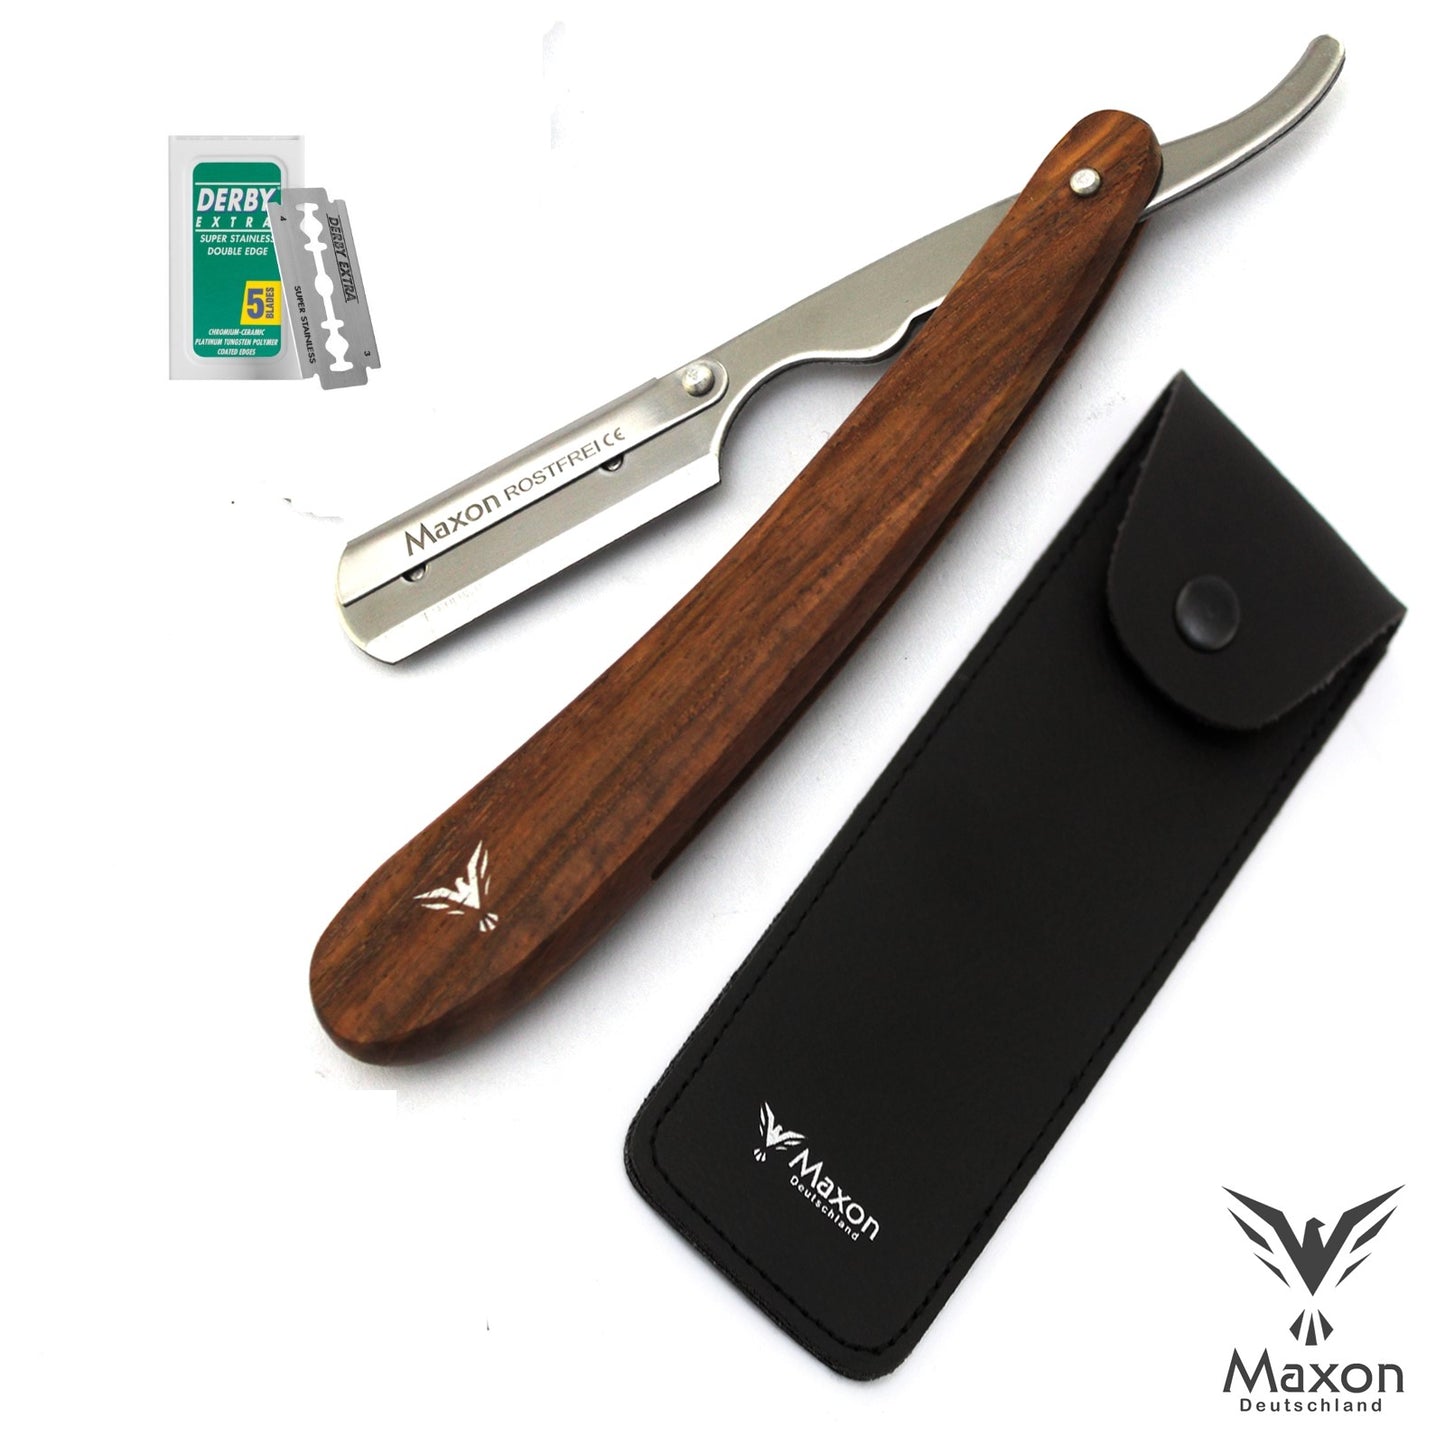 Straight Razor natural wooden handle and stainless steel blade - HAB 